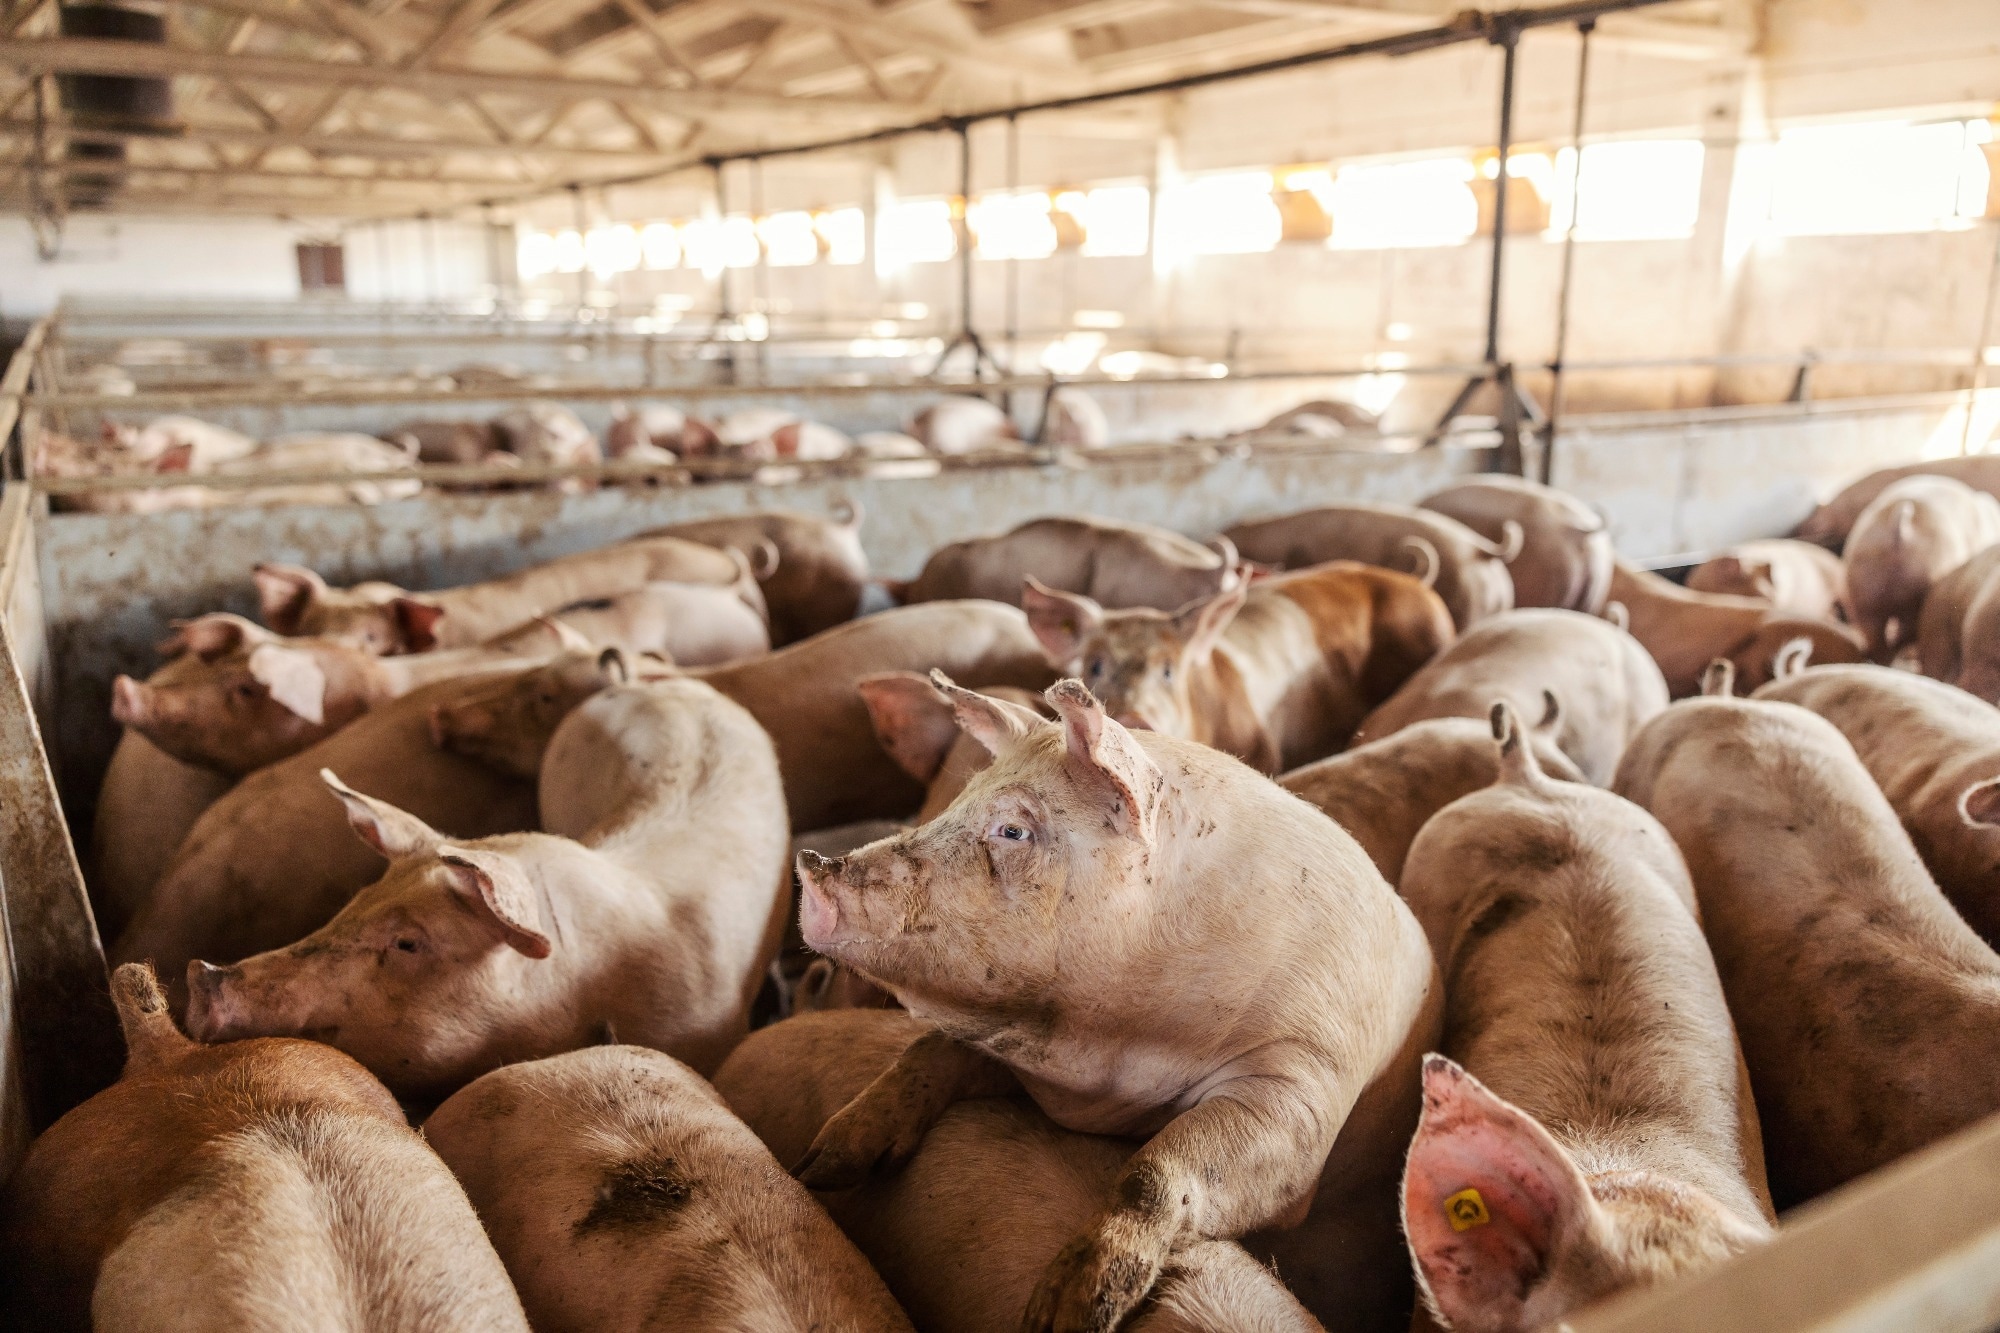 Intensive pig farming linked to dangerous zoonotic pathogens, study warns